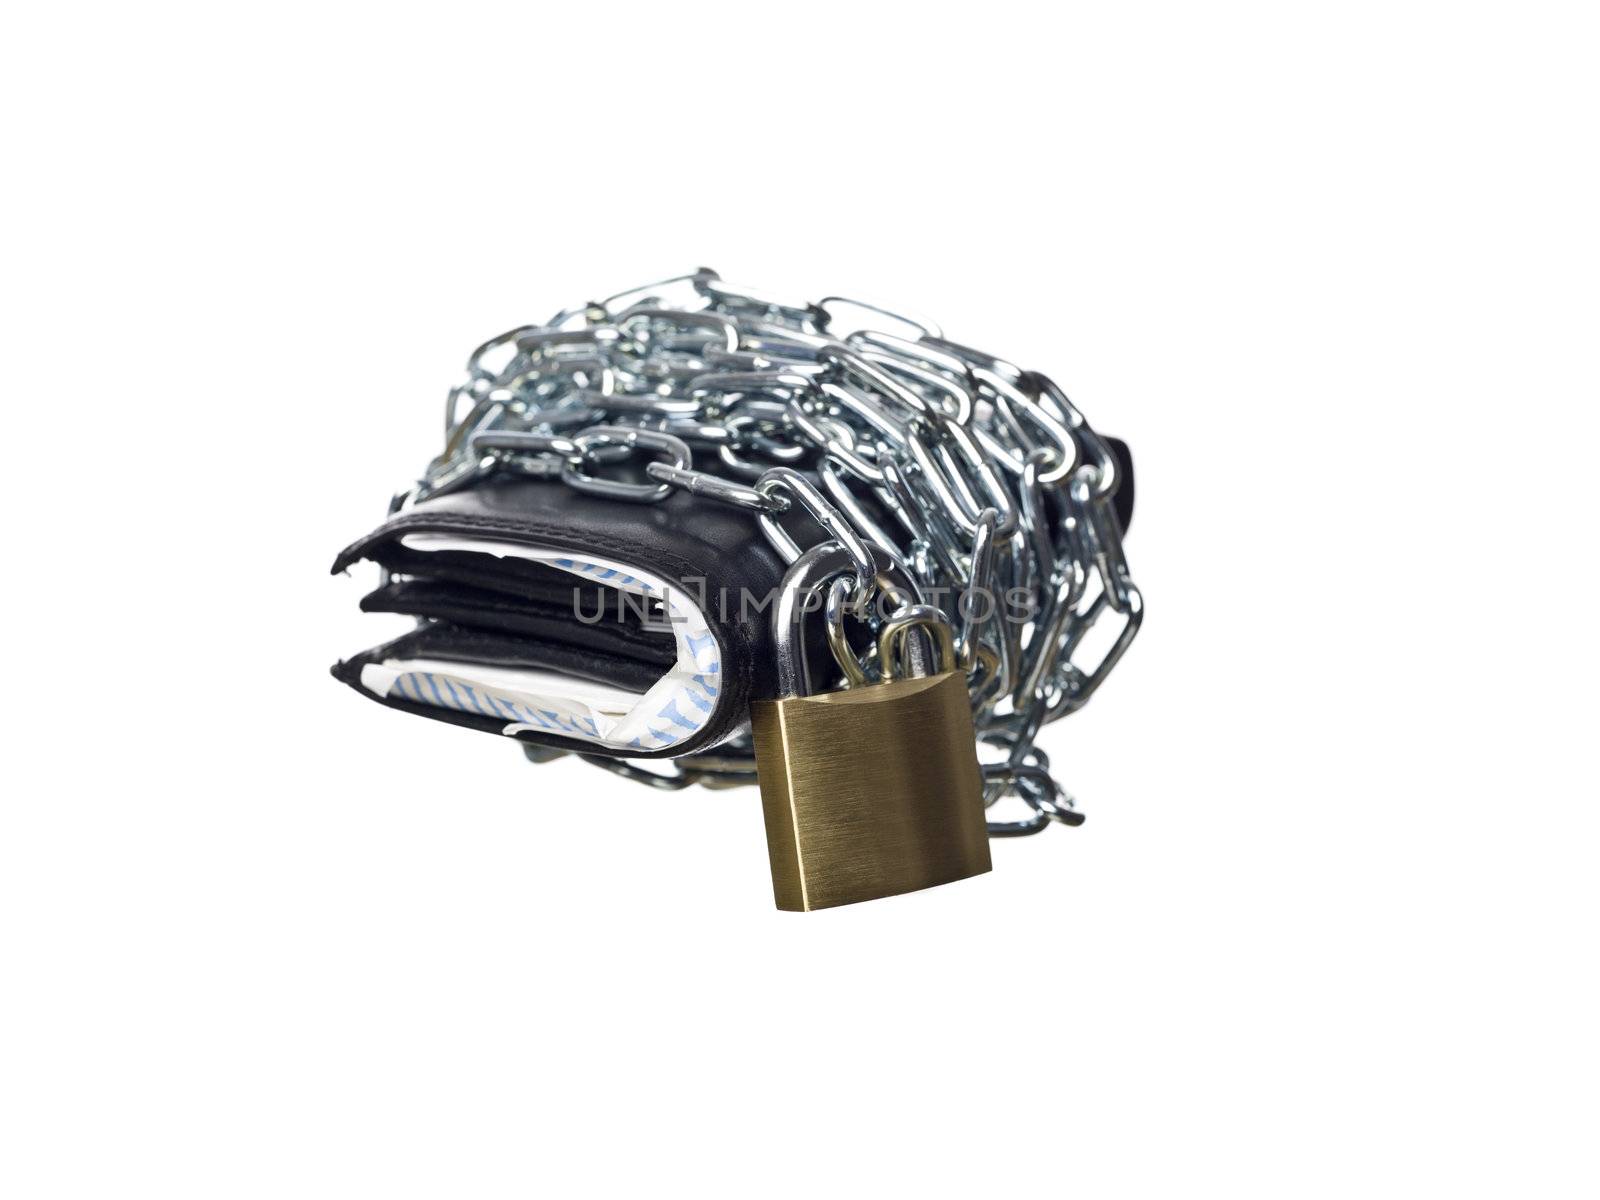 Wallet wrapped in chains by gemenacom